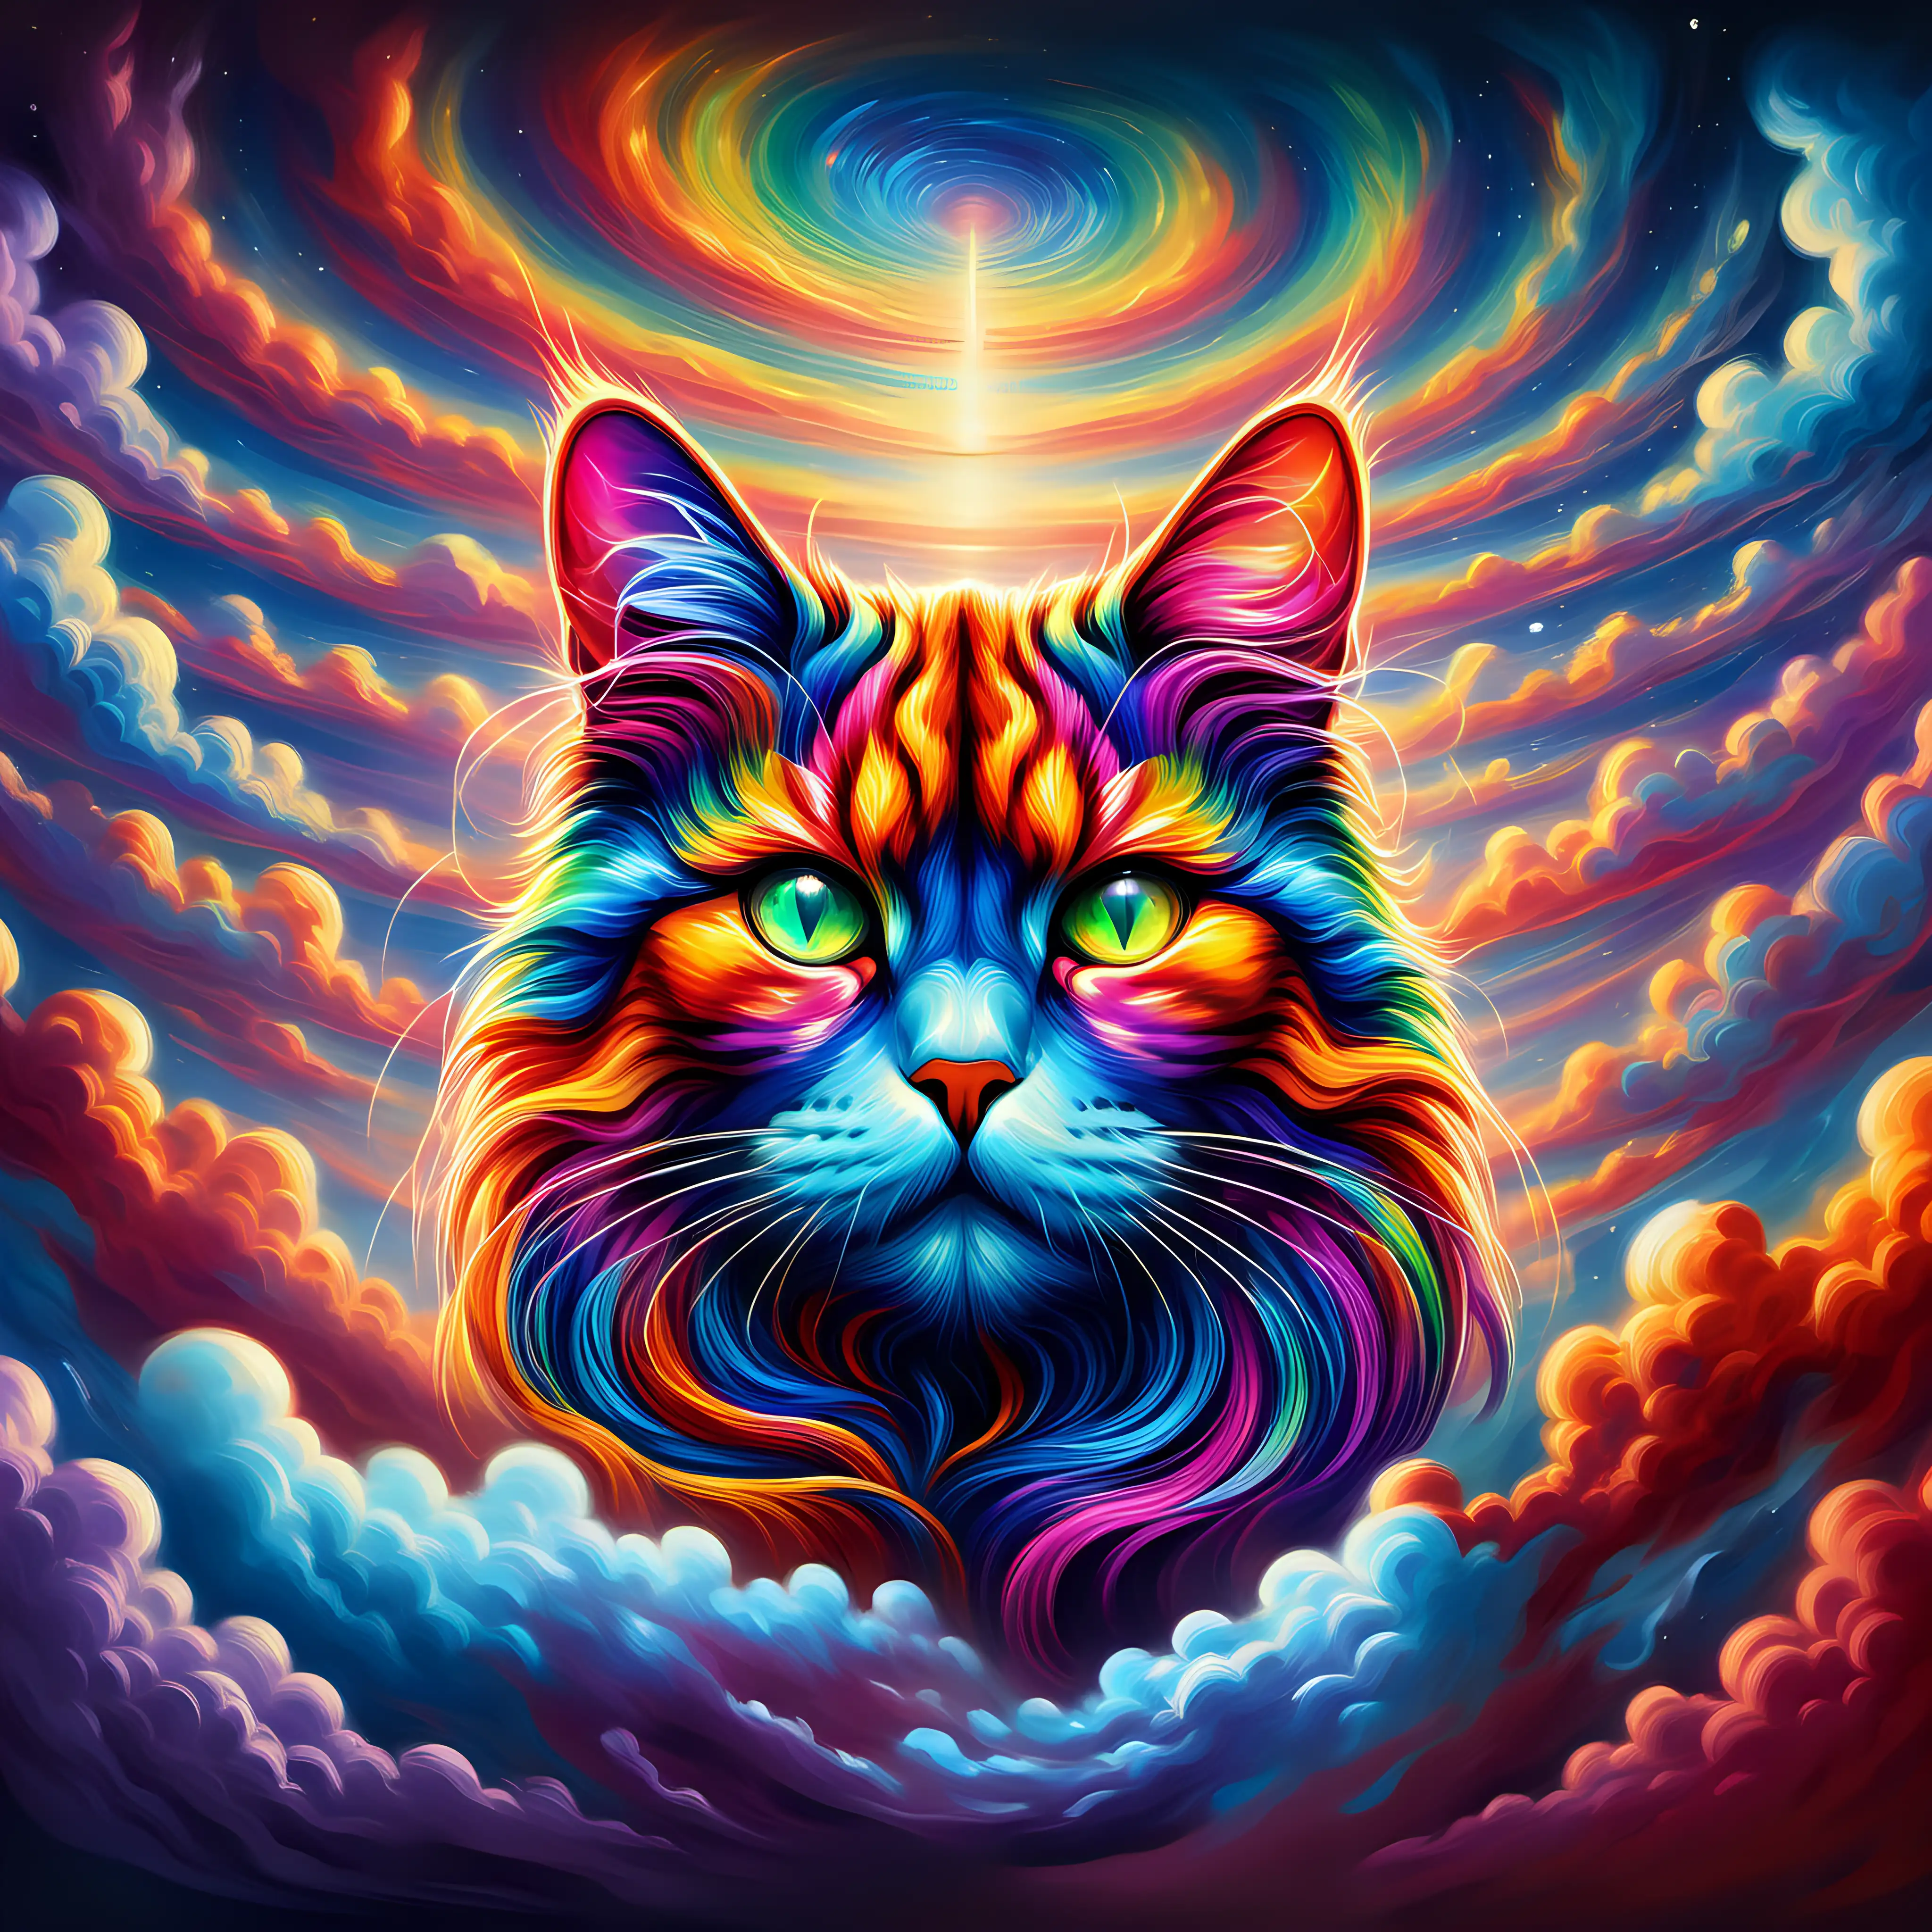 Imagine a breathtaking scene where a vibrant, multi-hued cat head emerges from a canvas of swirling, iridescent clouds. The cat head form is vividly painted with a palette of vibrant colors, emanating an aura of raw power and strength amidst the ever-shifting, kaleidoscopic clouds that surround it. Capture the essence of this majestic creature as it stands as a symbol of primal force and beauty within the mesmerizing, colorful expanse of the sky.
